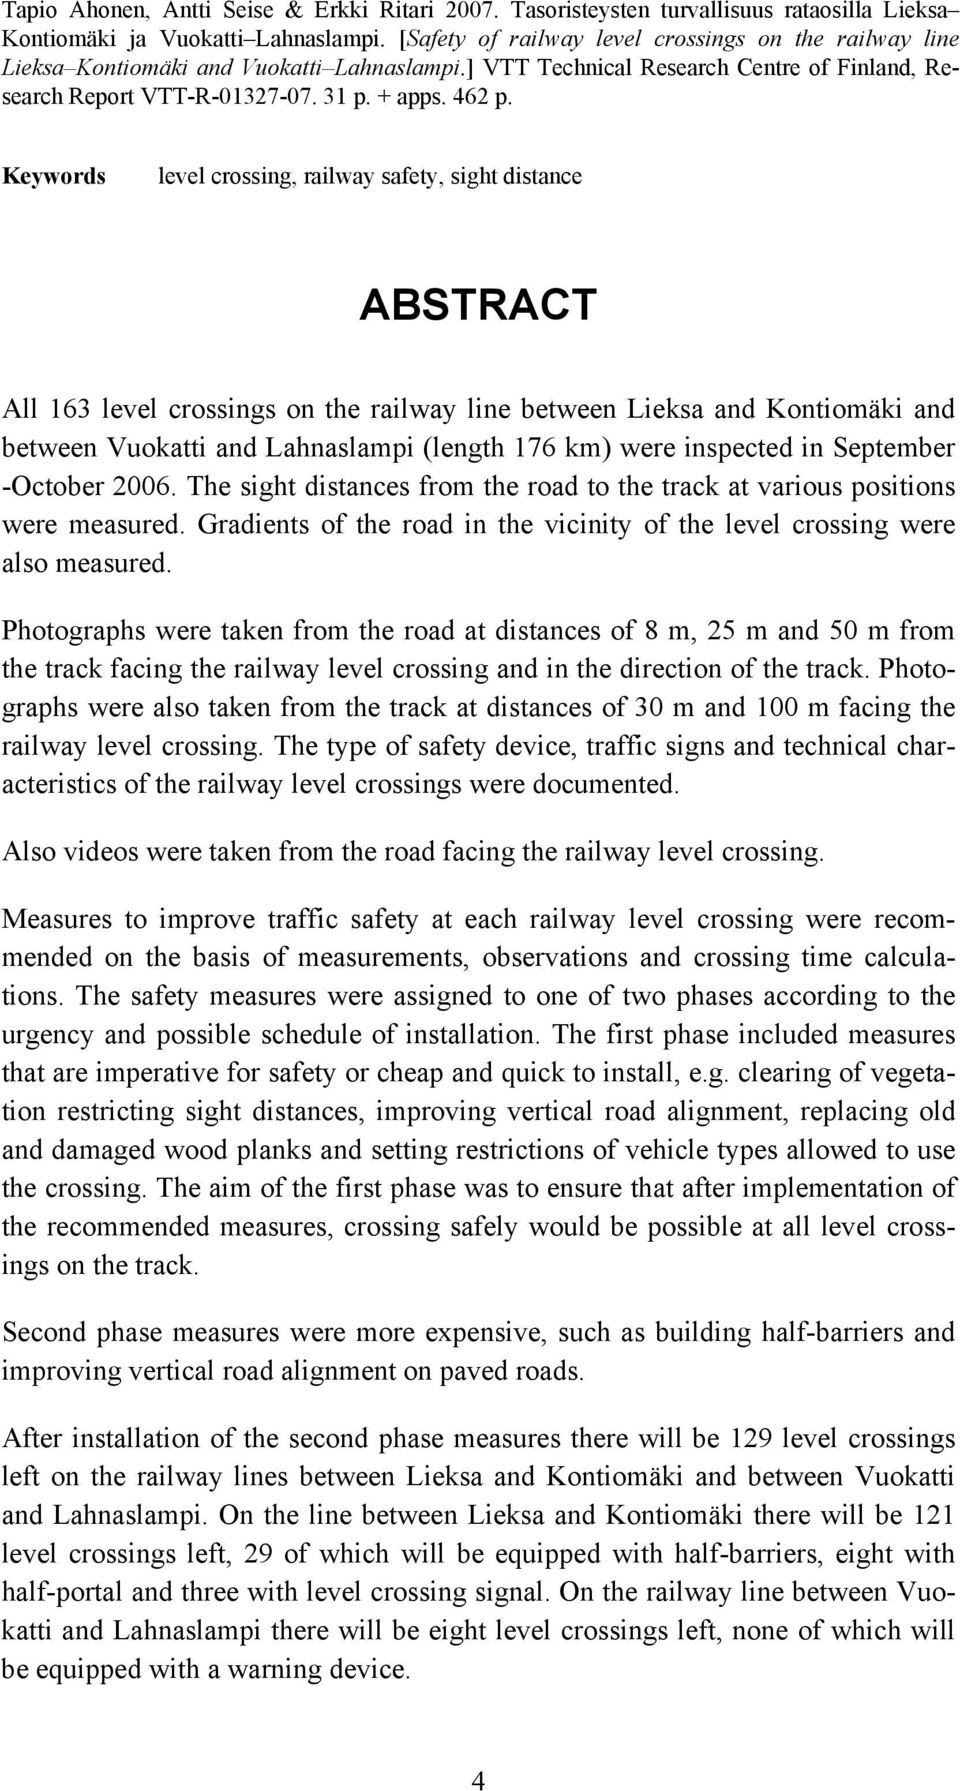 Keywords level crossing, railway safety, sight distance ABSTRACT All 163 level crossings on the railway line between Lieksa and Kontiomäki and between Vuokatti and Lahnaslampi (length 176 km) were